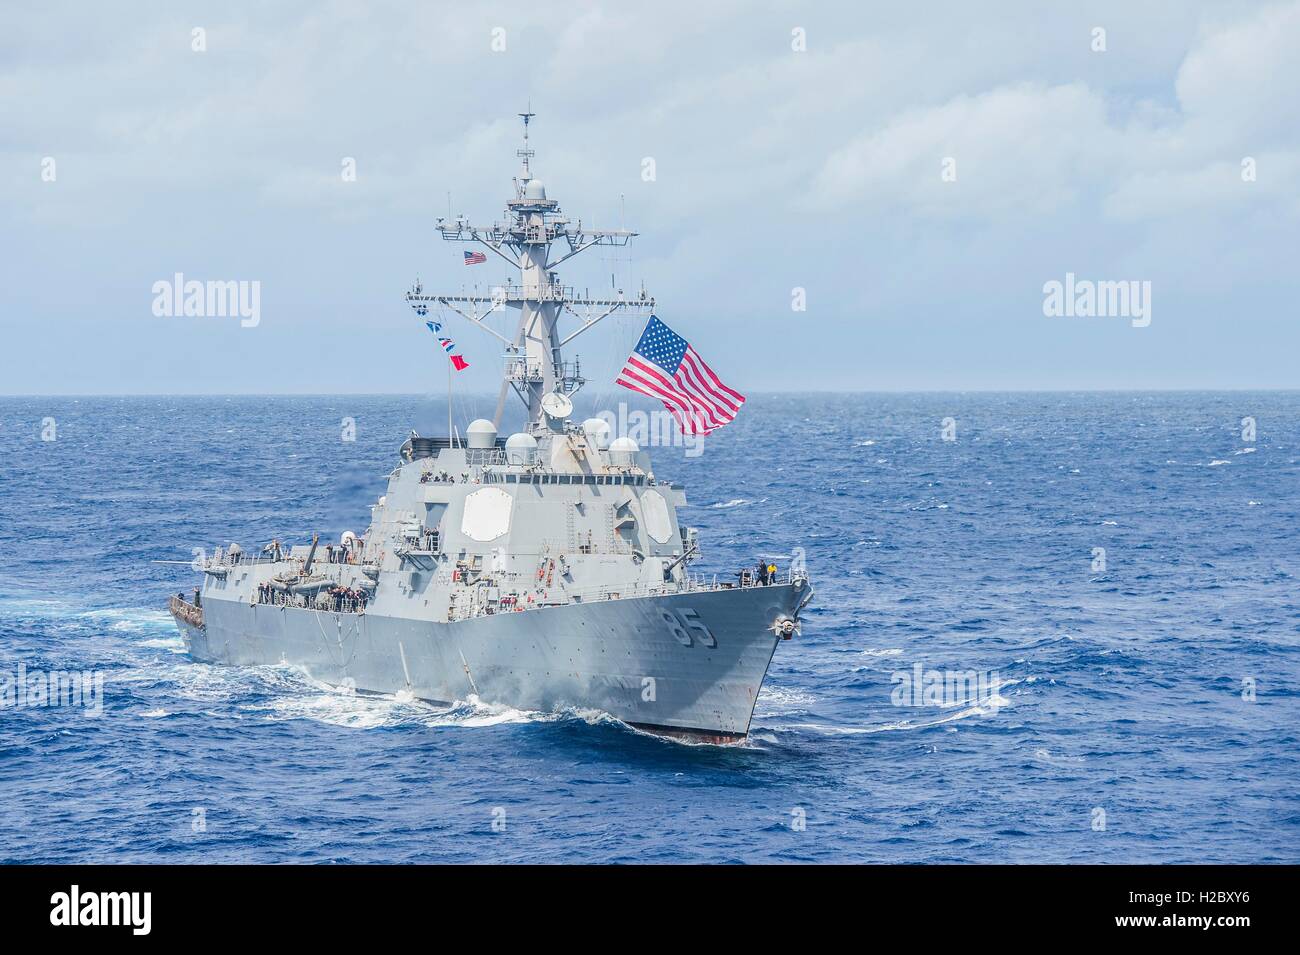 The USN Arleigh Burke-class guided-missile destroyer USS McCampbell steams in formation to signify the completion of Valiant Shield exercises September 23, 2016 in the Philippine Sea. Stock Photo